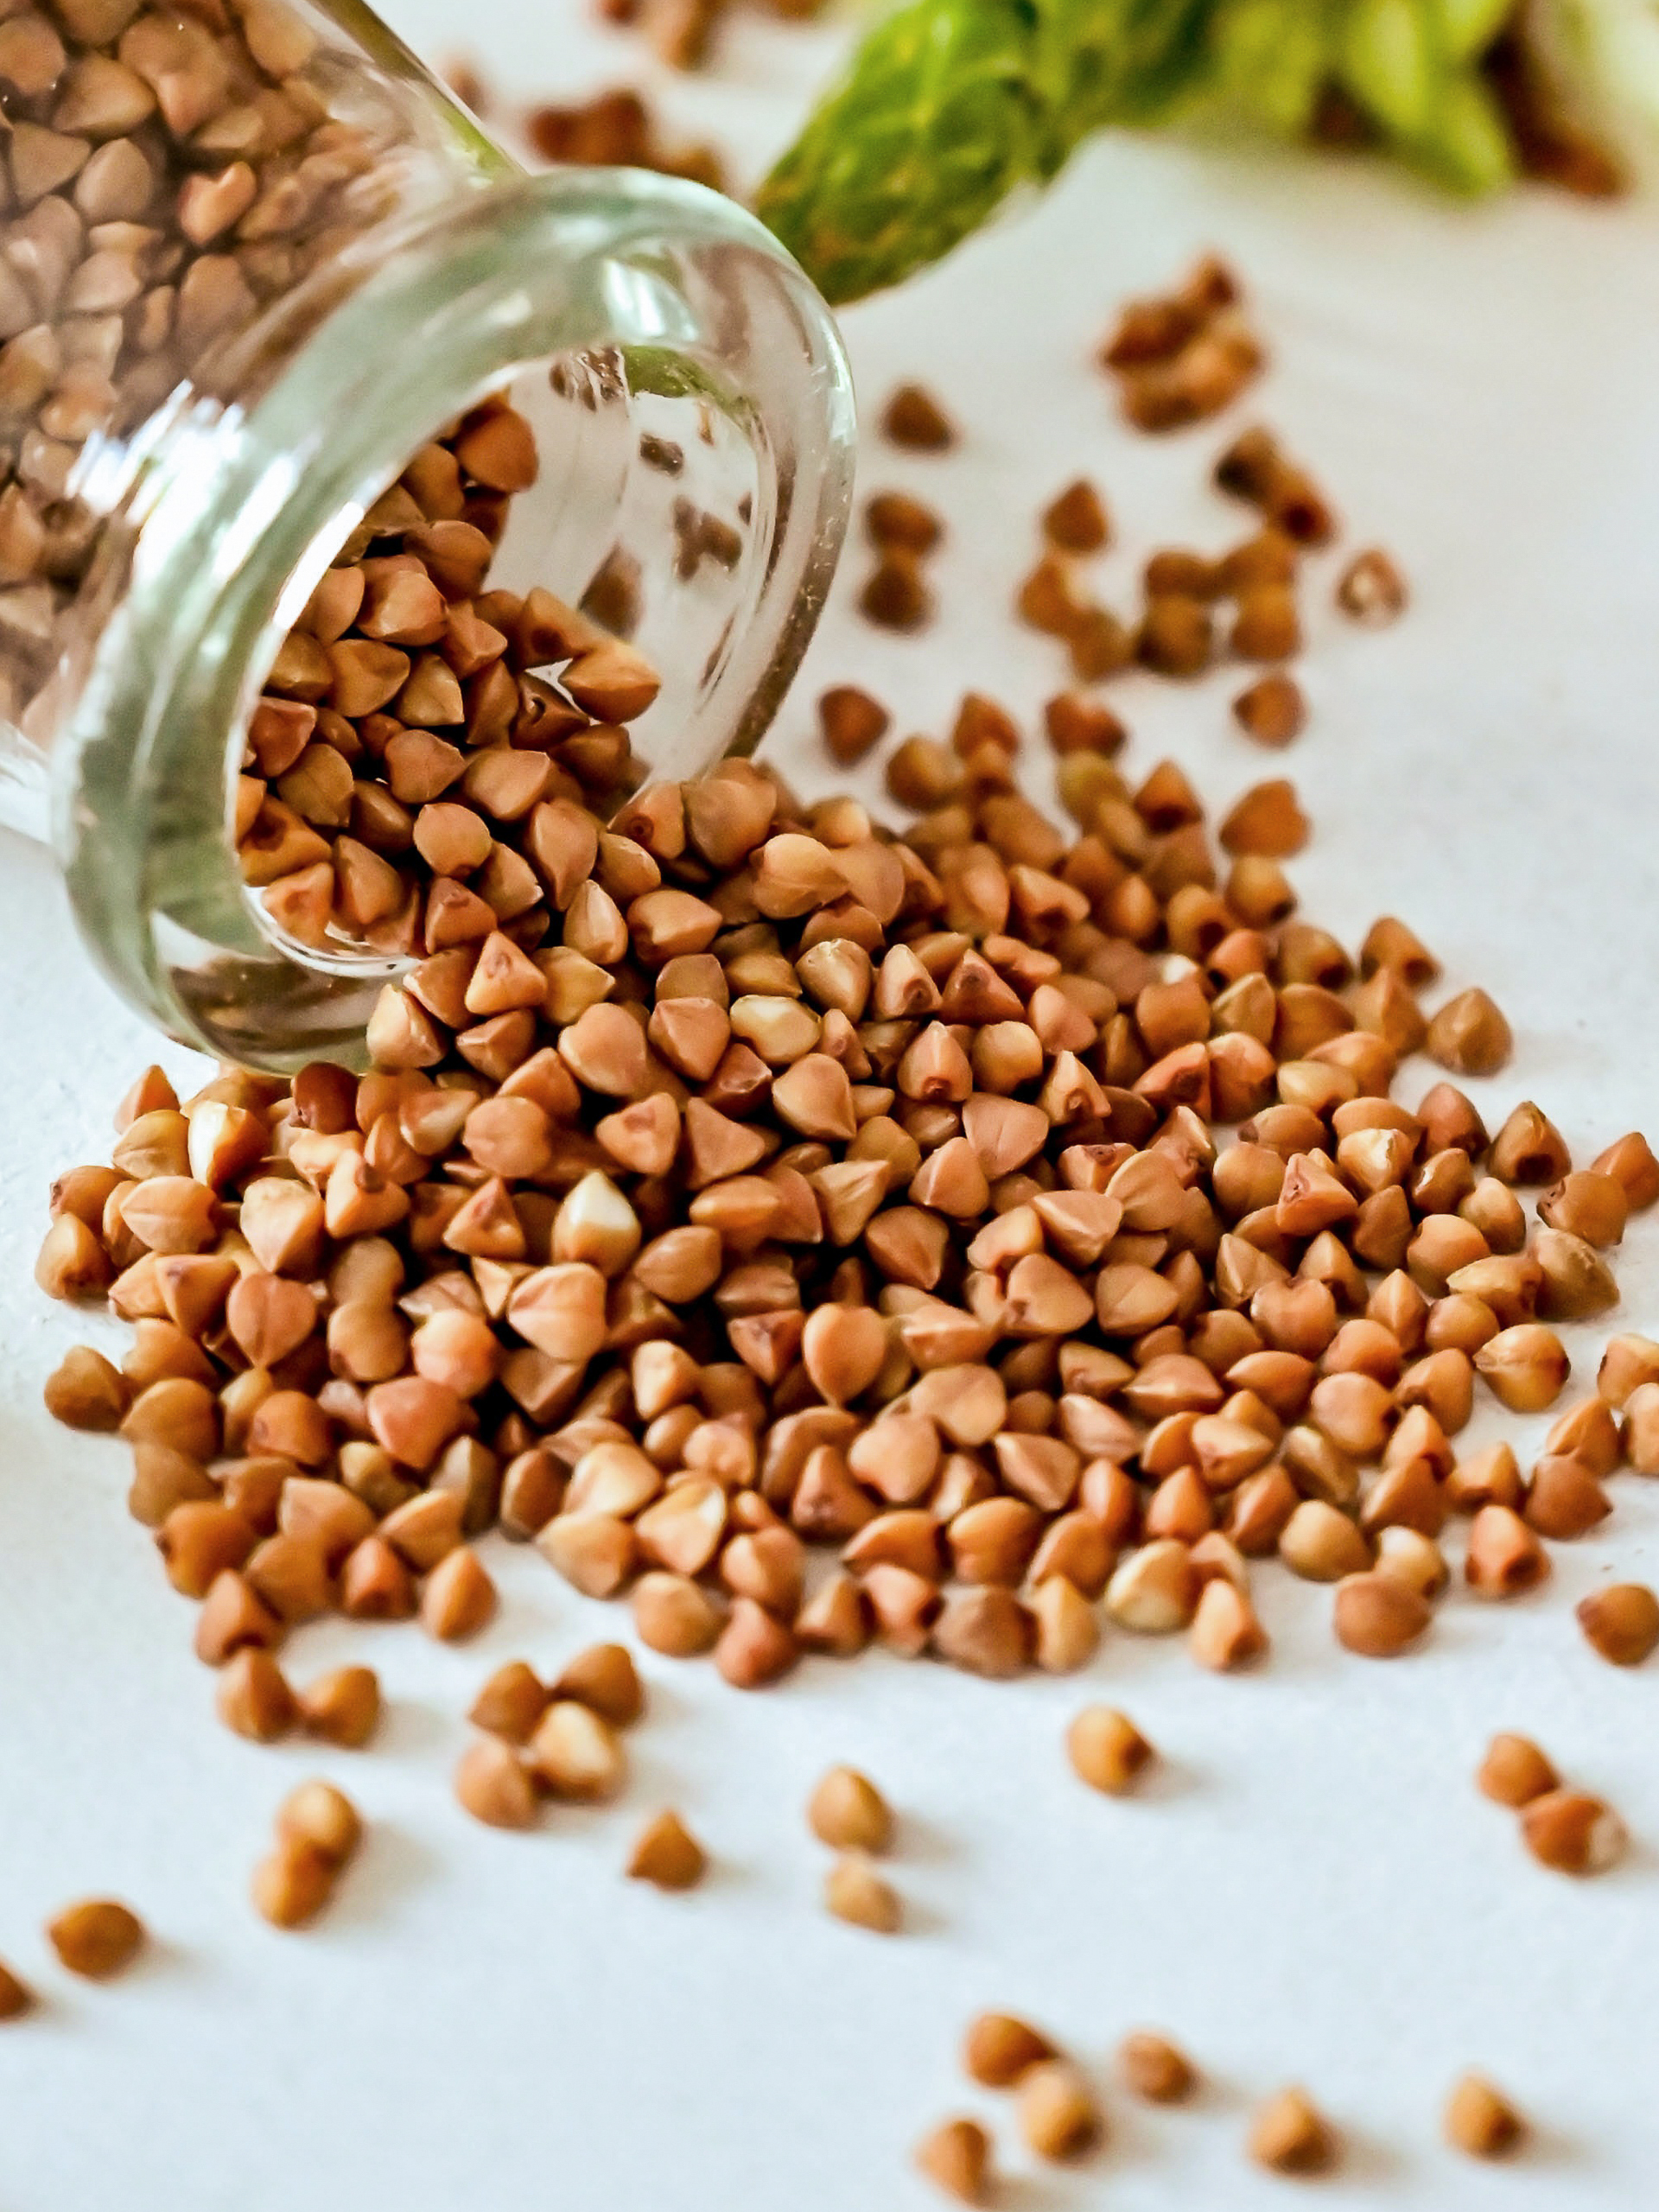 Superfood Buckwheat: Nutrition, Benefits, and Recipes